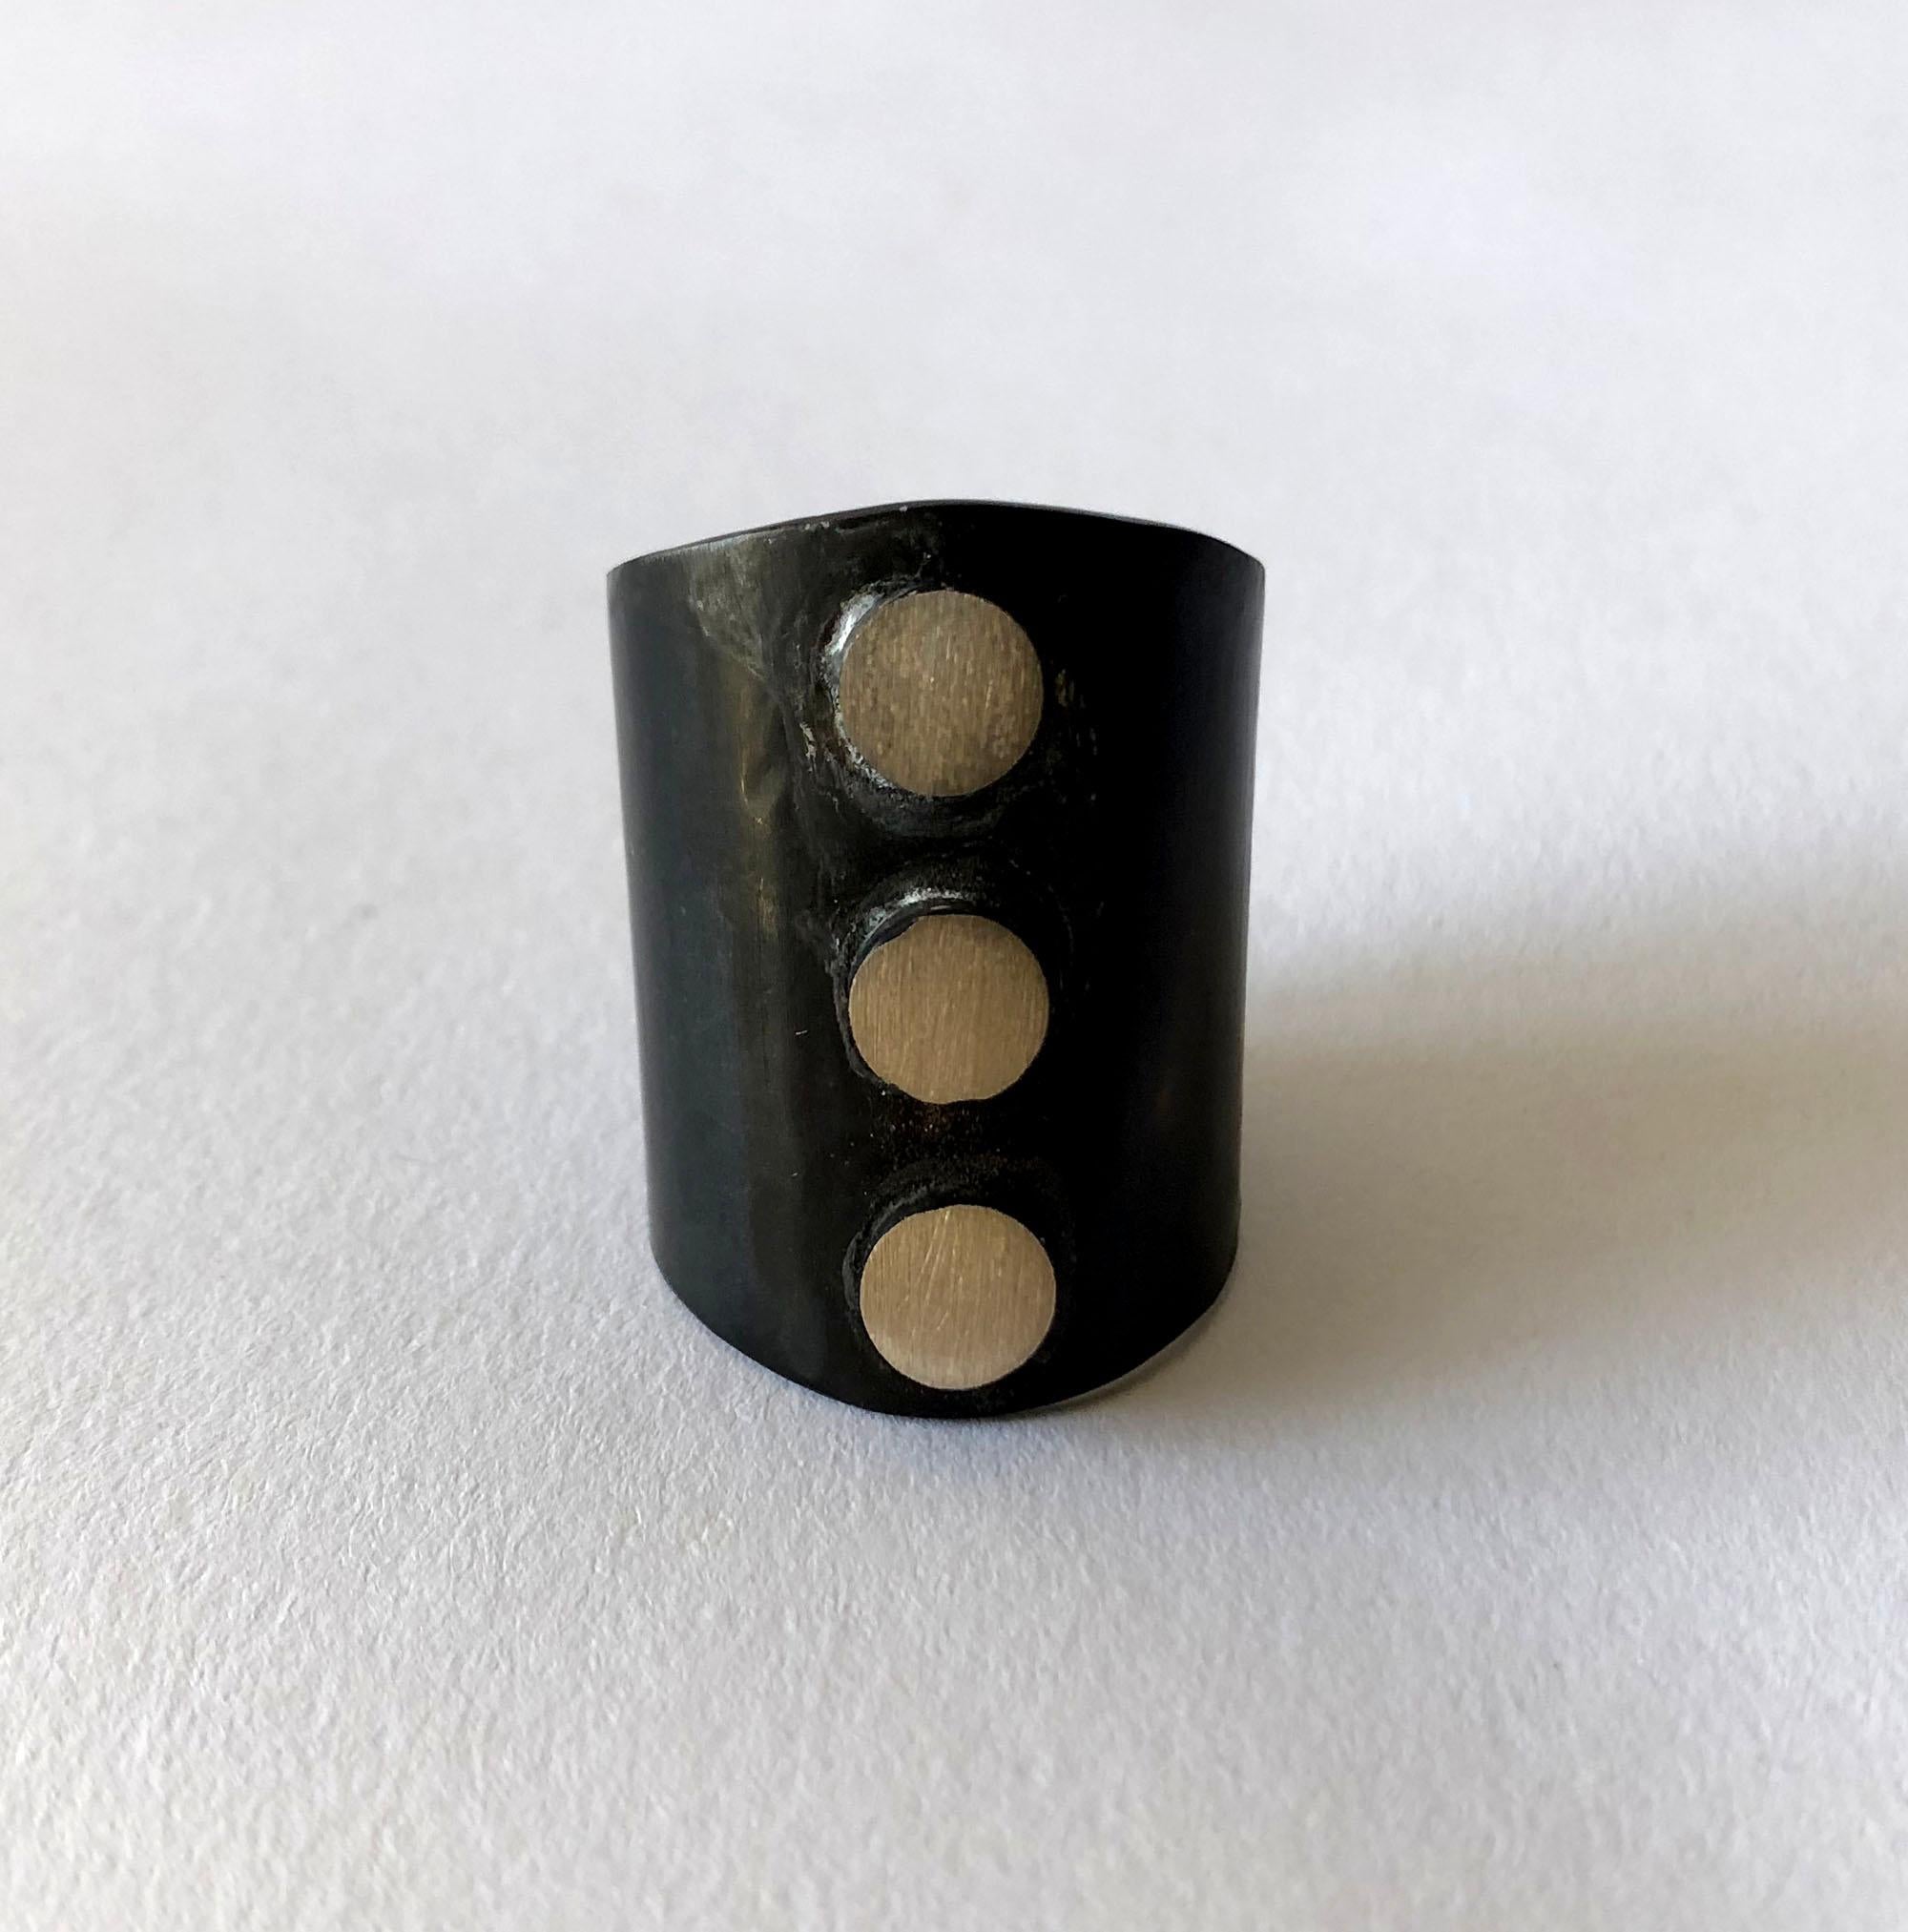 Oxidized sterling silver three dot post modern ring created by Heidi Abrahamson. Ring is a finger size 10.5 - 11 and measures 1.25